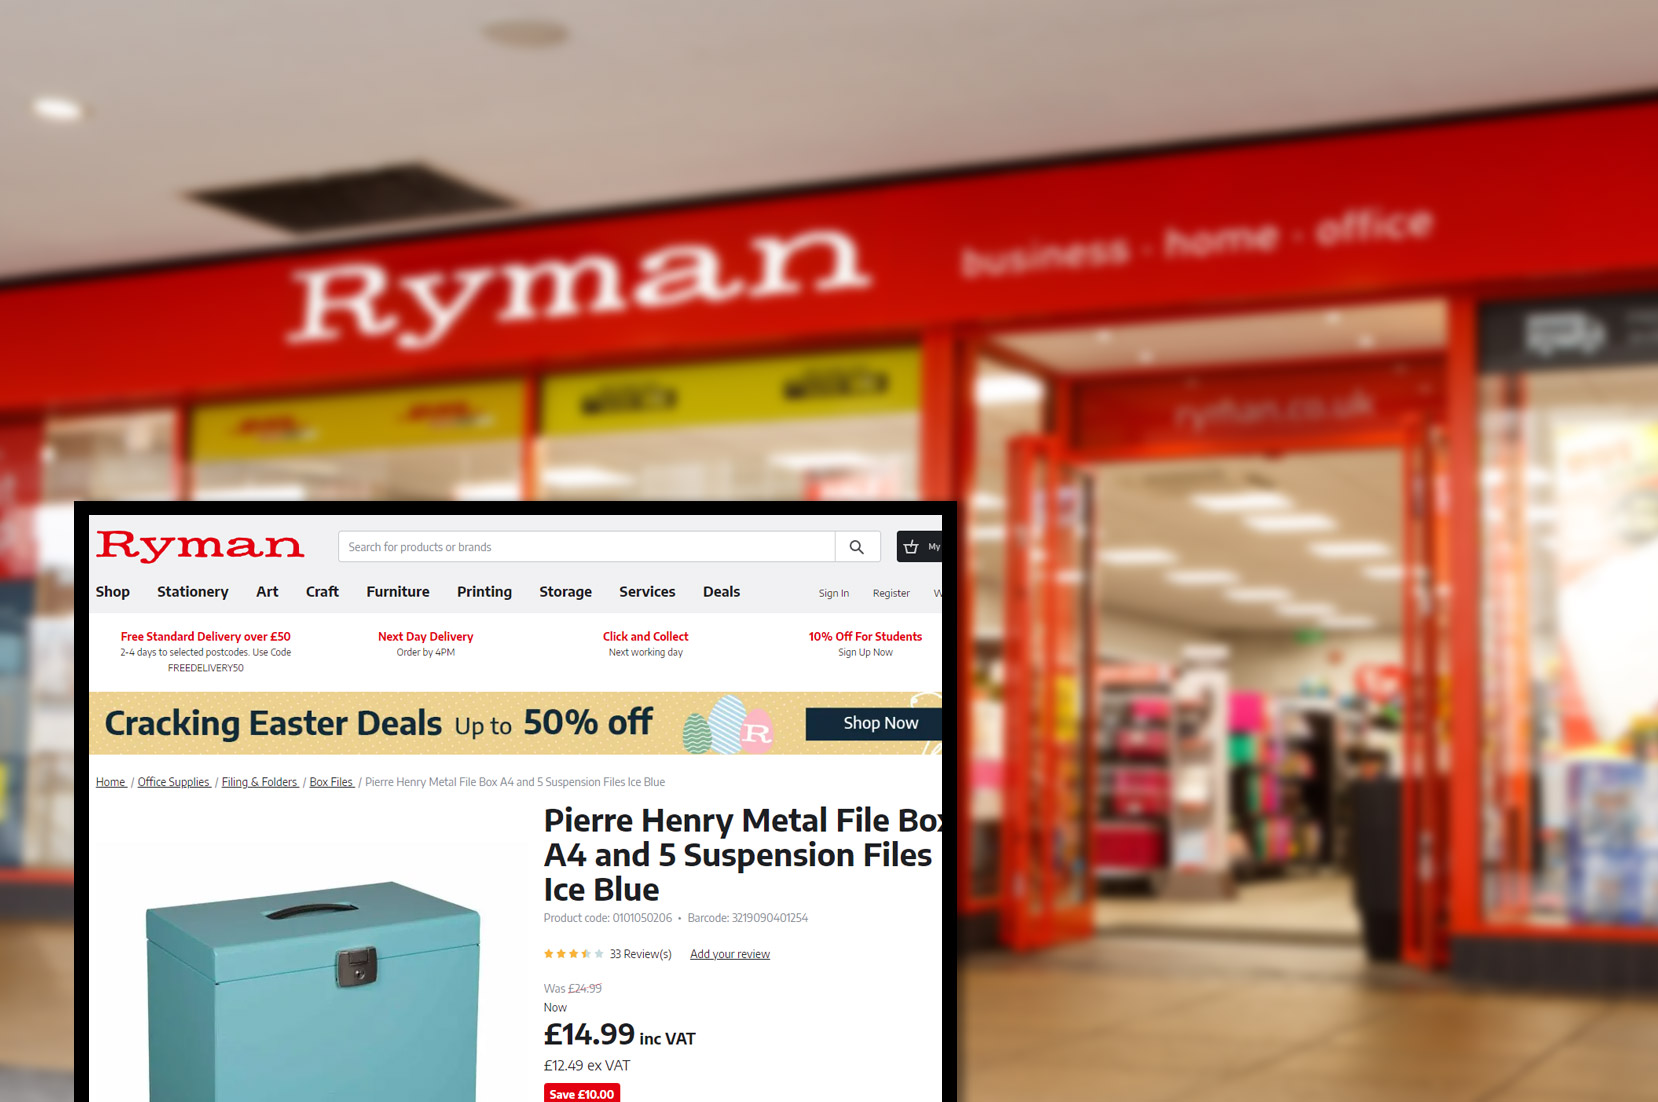 ryman-co-ukproduct-pricing-information-and-image-scraping-services